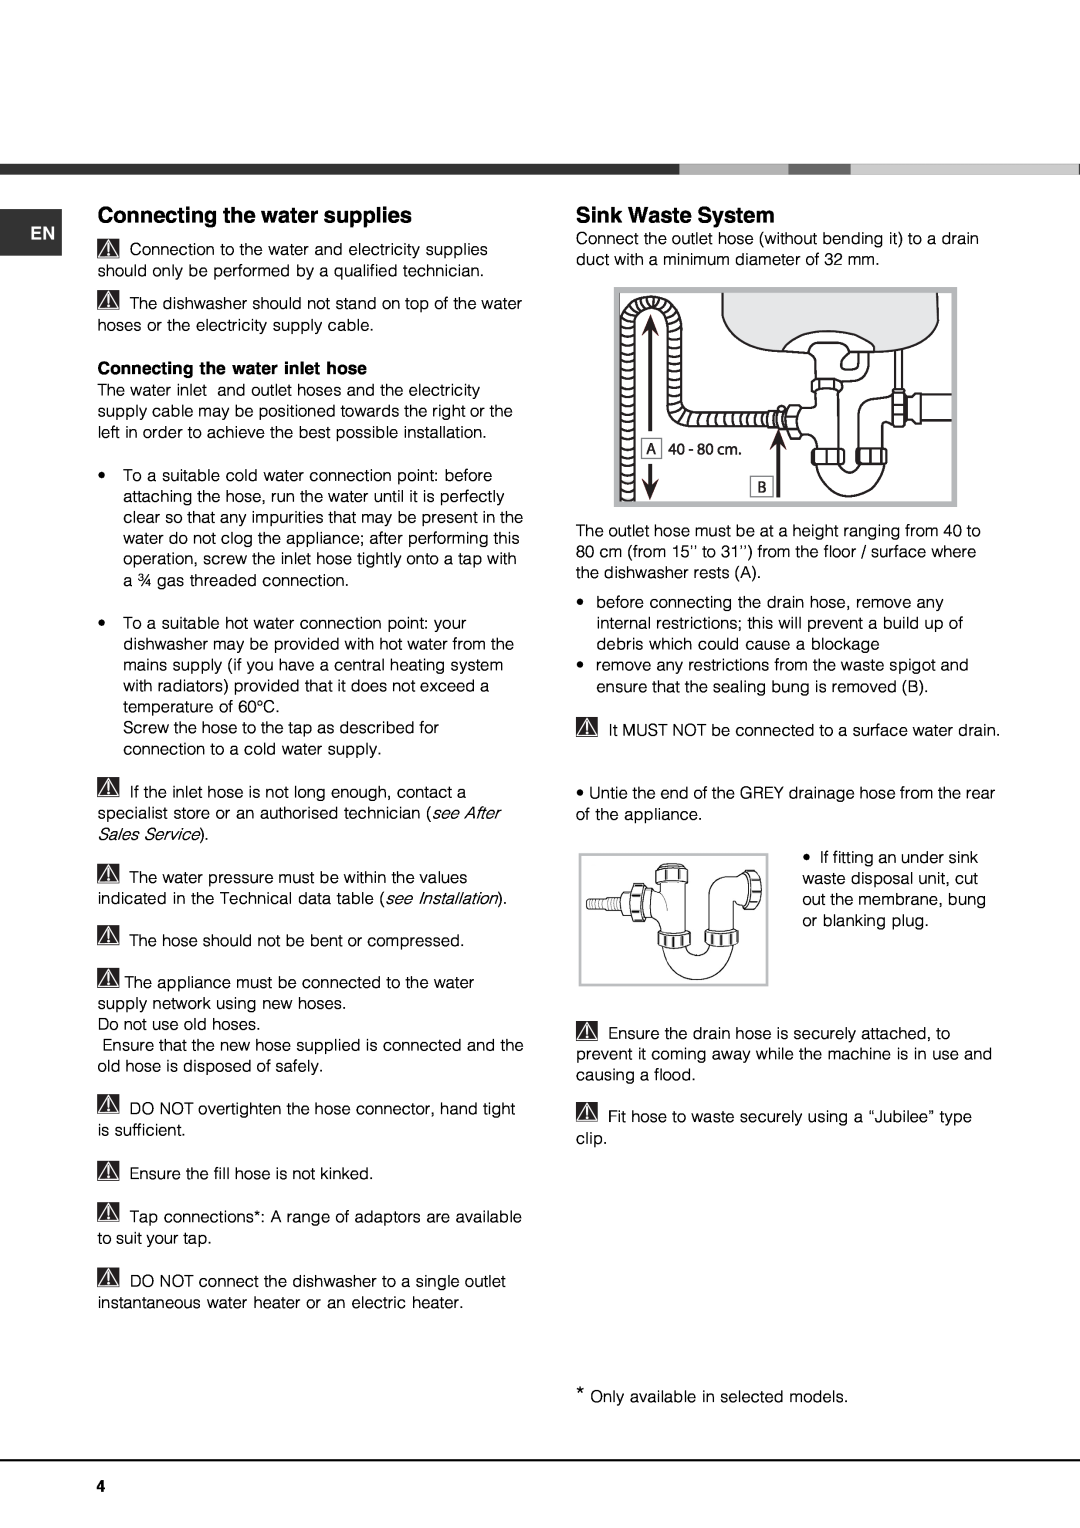 Hotpoint FDM550PR manual Connecting the water supplies, Sink Waste System, Connecting the water inlet hose 